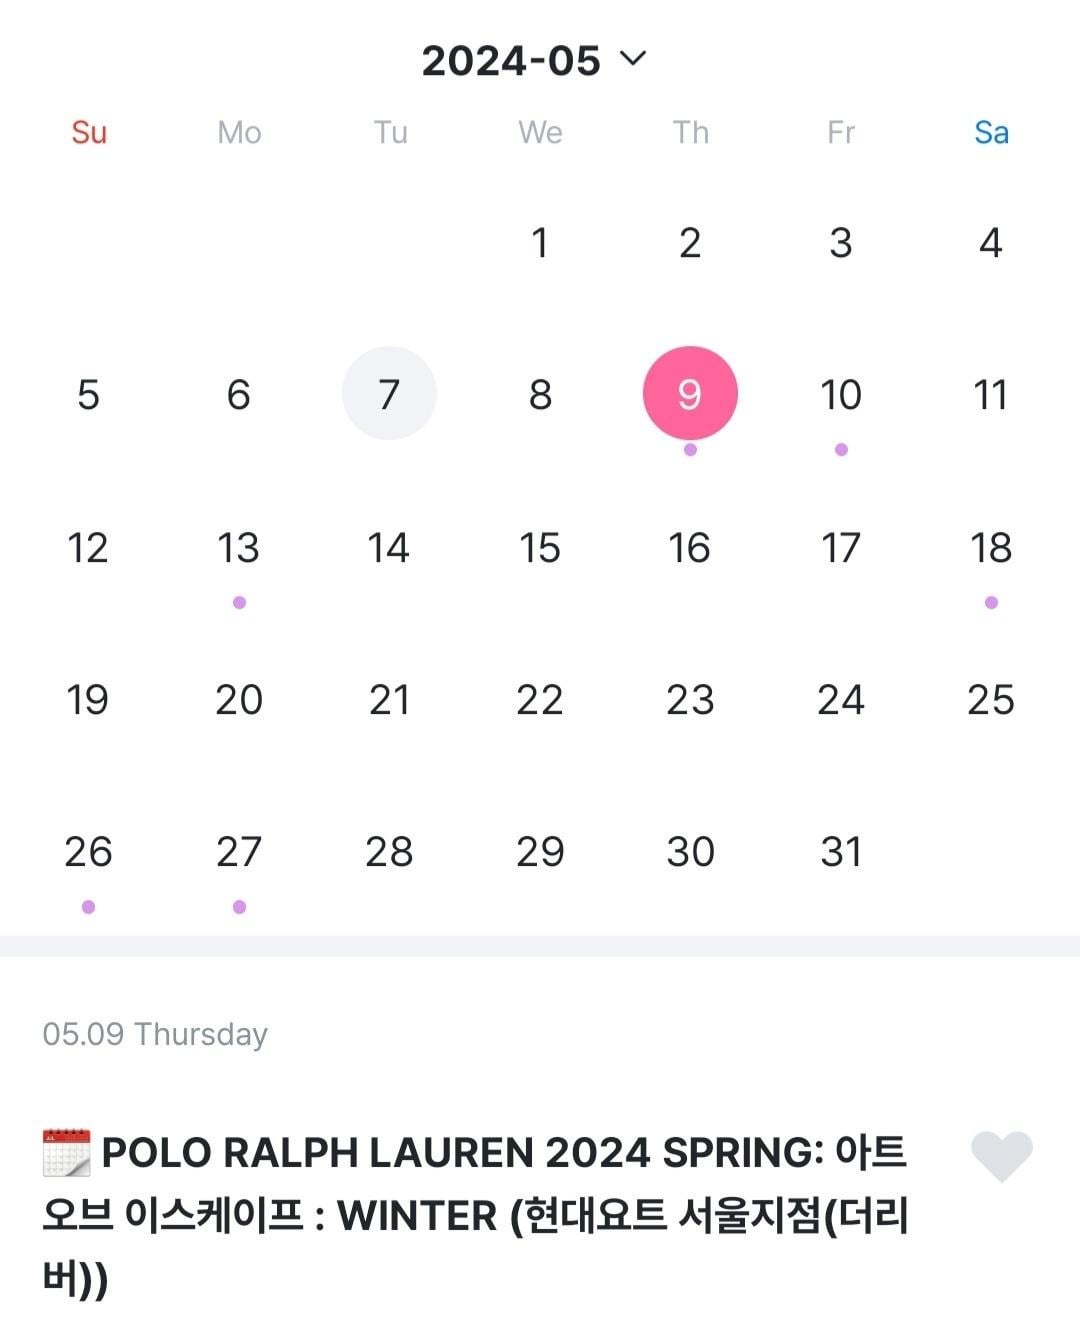 240507 Winter will attend ‘POLO RALPH LAUREN 2024 SPRING: Art of Escape’ @ Hyundai Yacht Seoul Club on May 9th at 12:50PM KST.